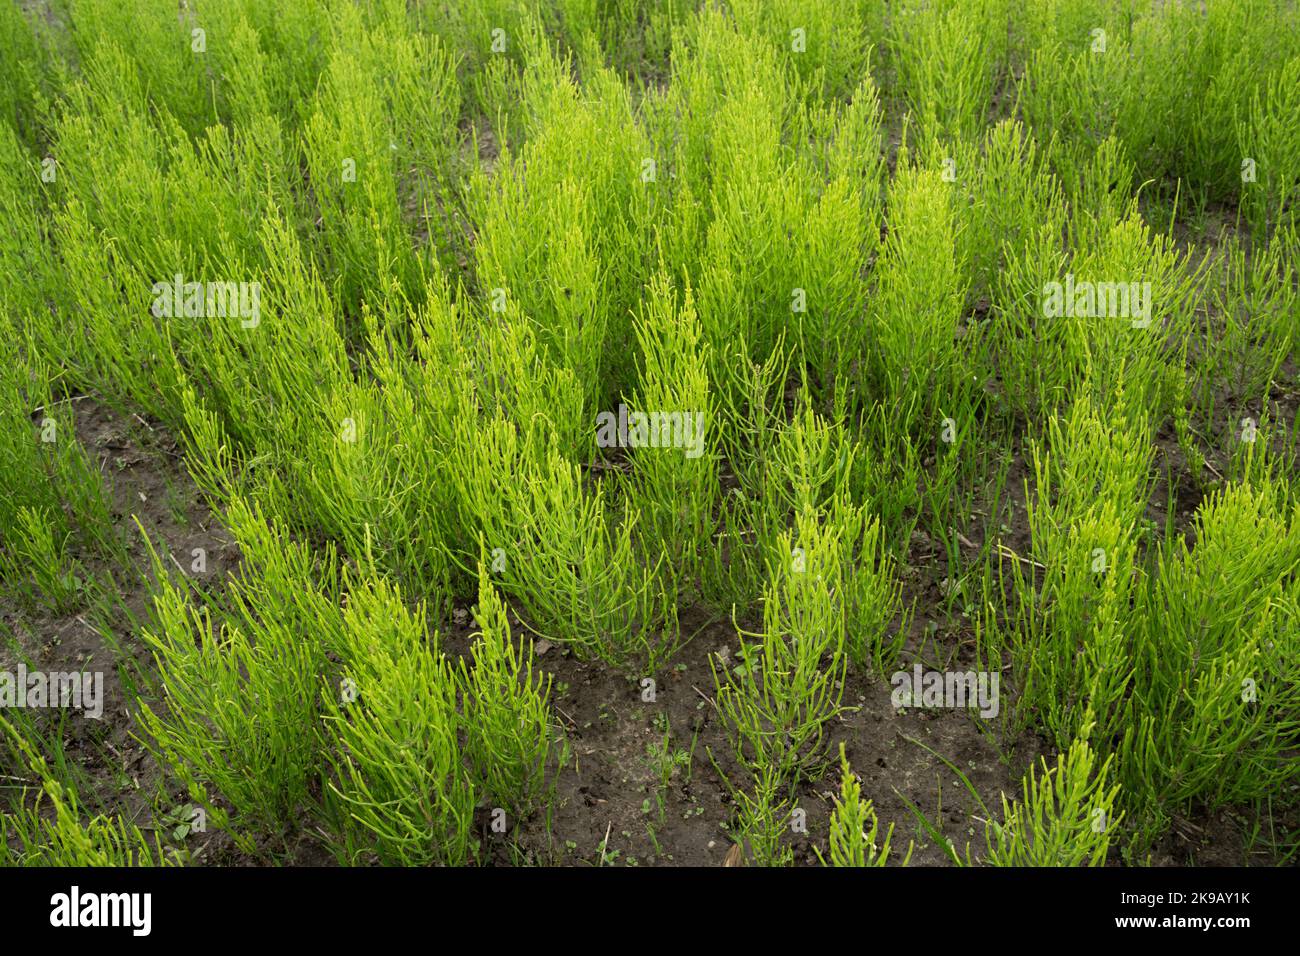 A large group of Field horsetail, Equisetum arvense growing on an agricultural field in Estonia, Northern Europe Stock Photo